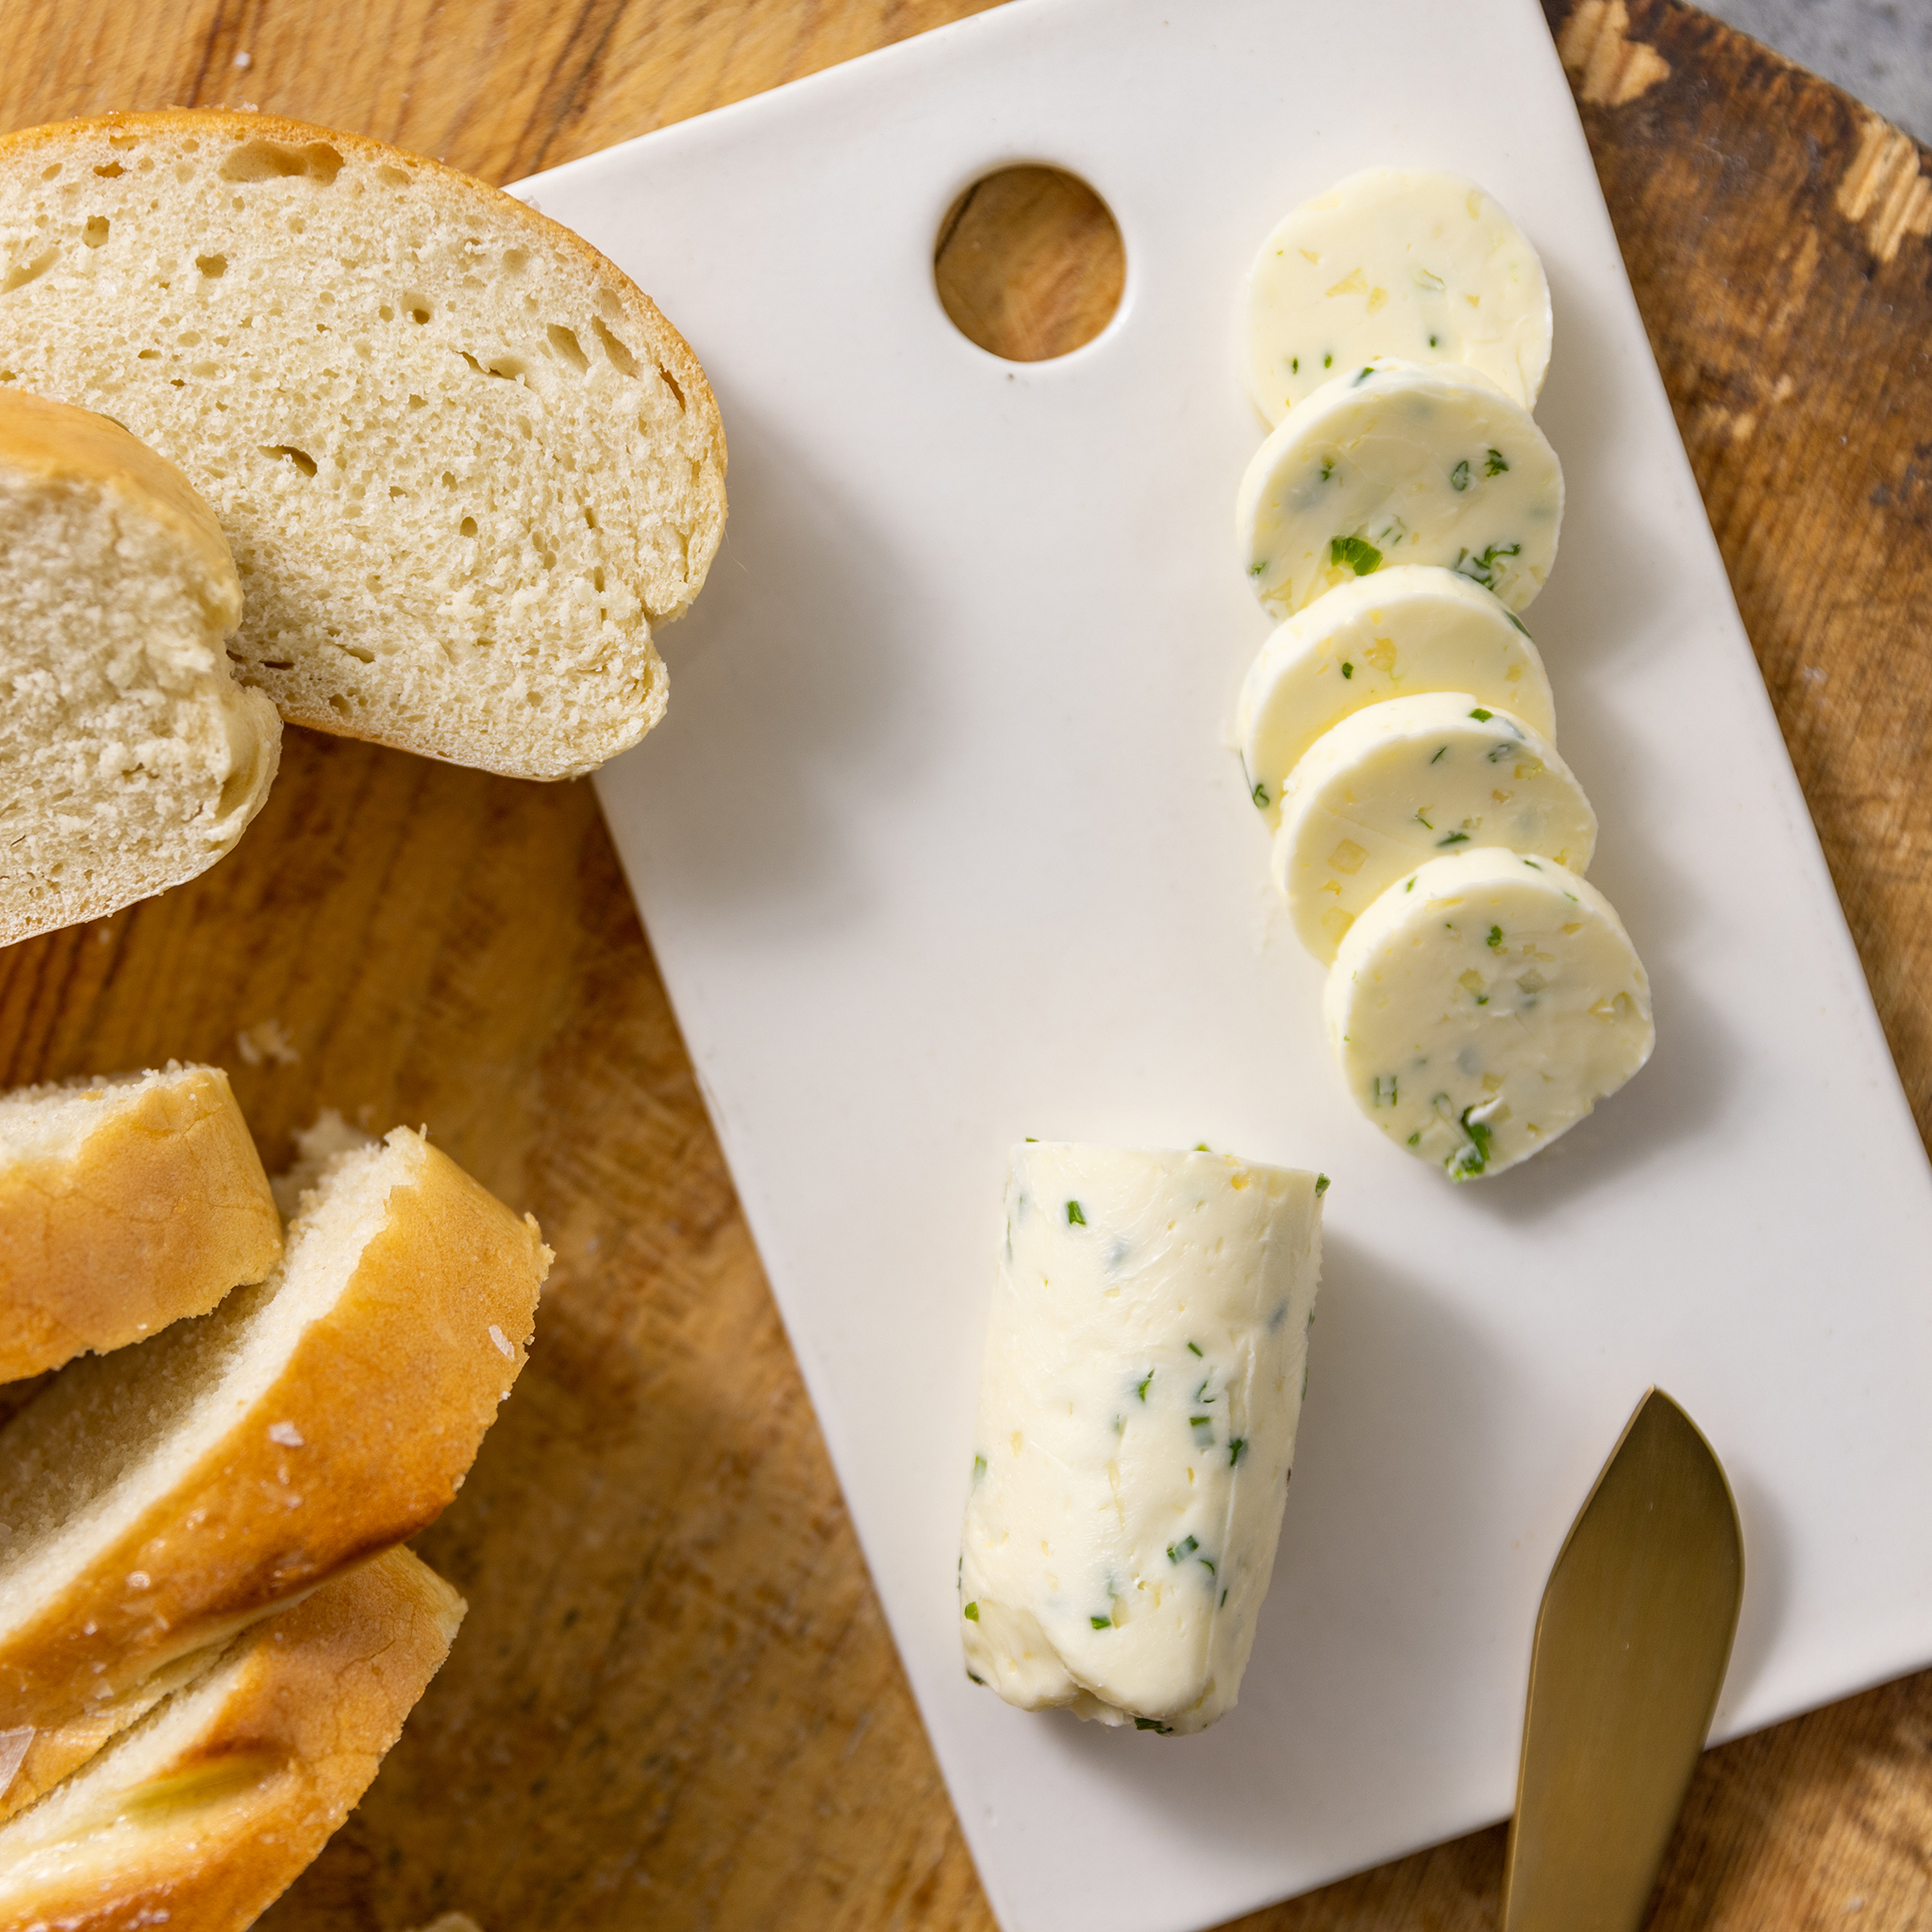 Joanna Gaines' Garlic-Chive Compound Butter